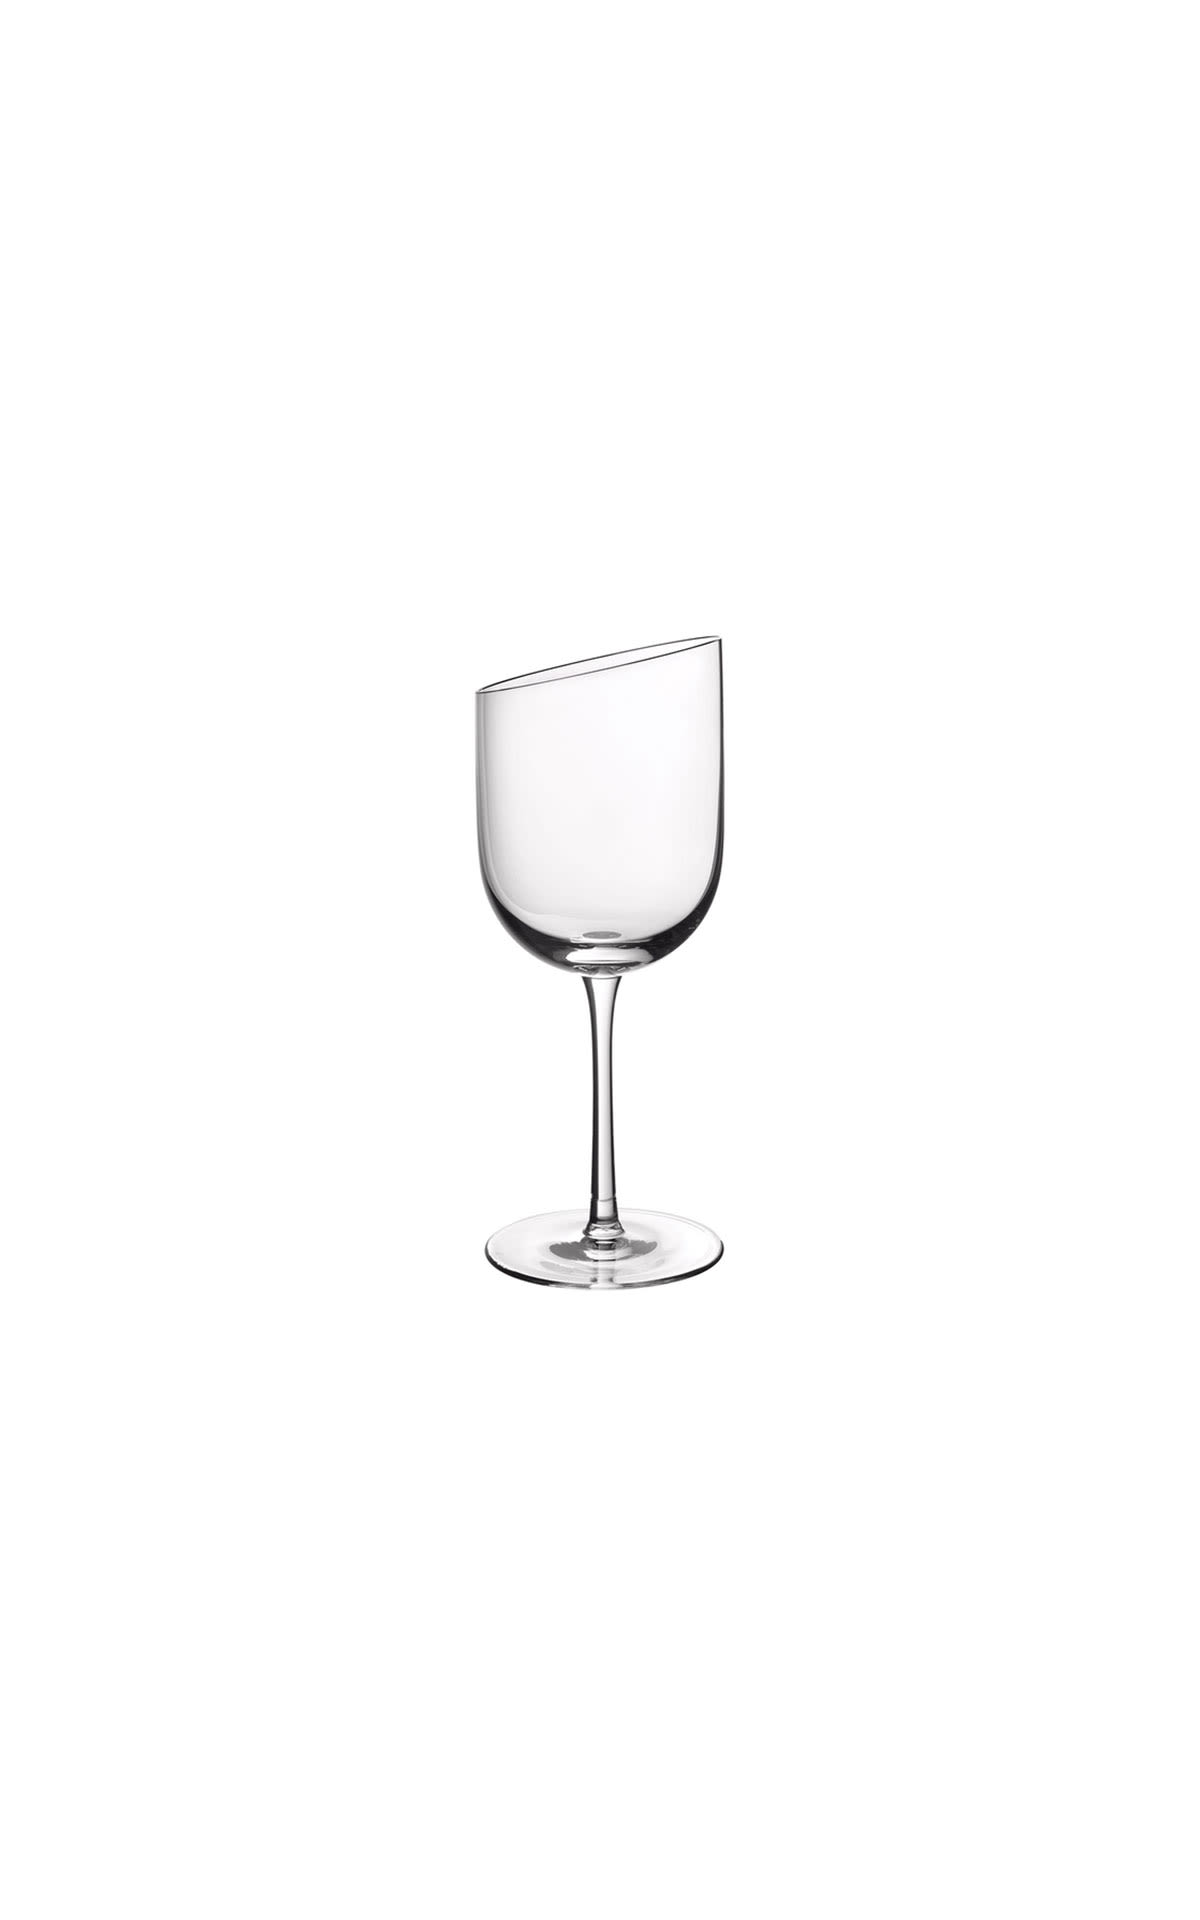 Villeroy & Boch New moon red wine from Bicester Village